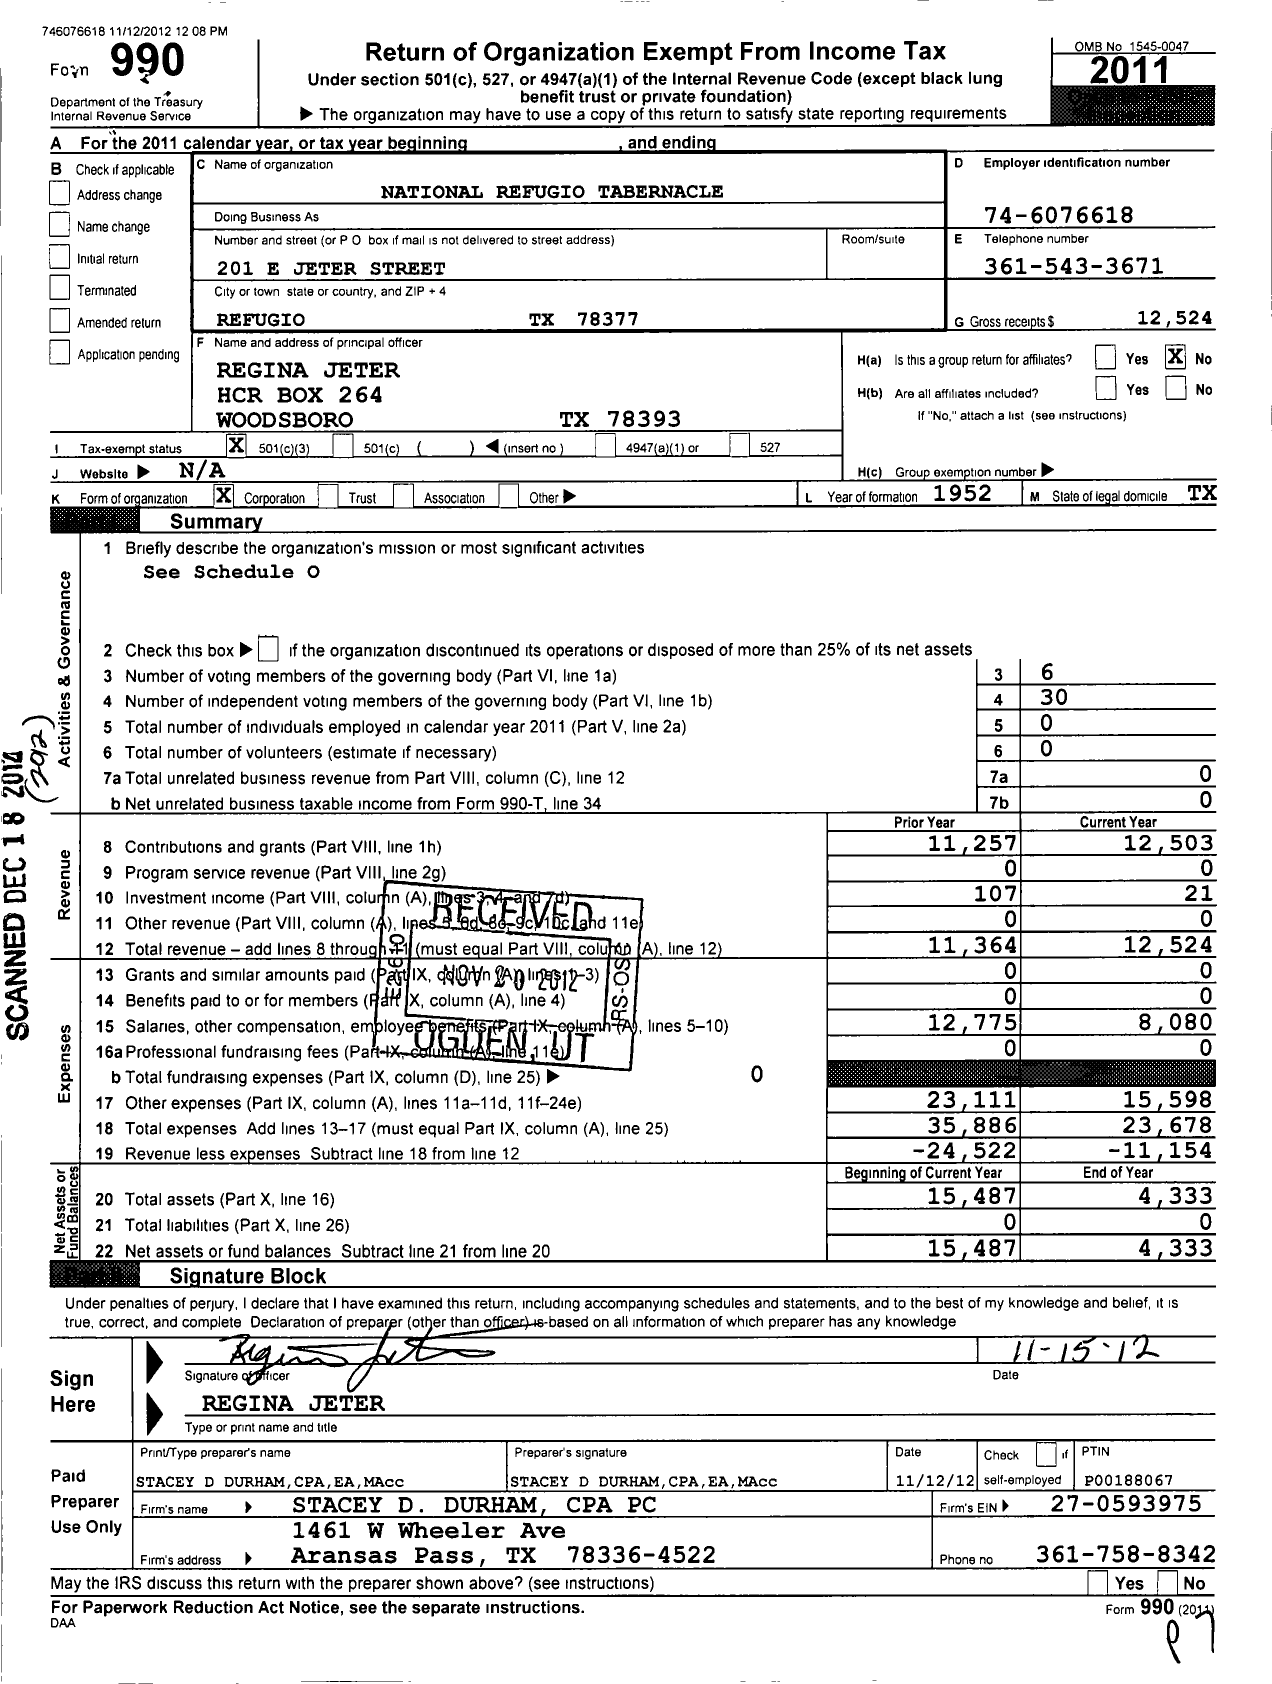 Image of first page of 2011 Form 990 for National Refugio Tabernacle